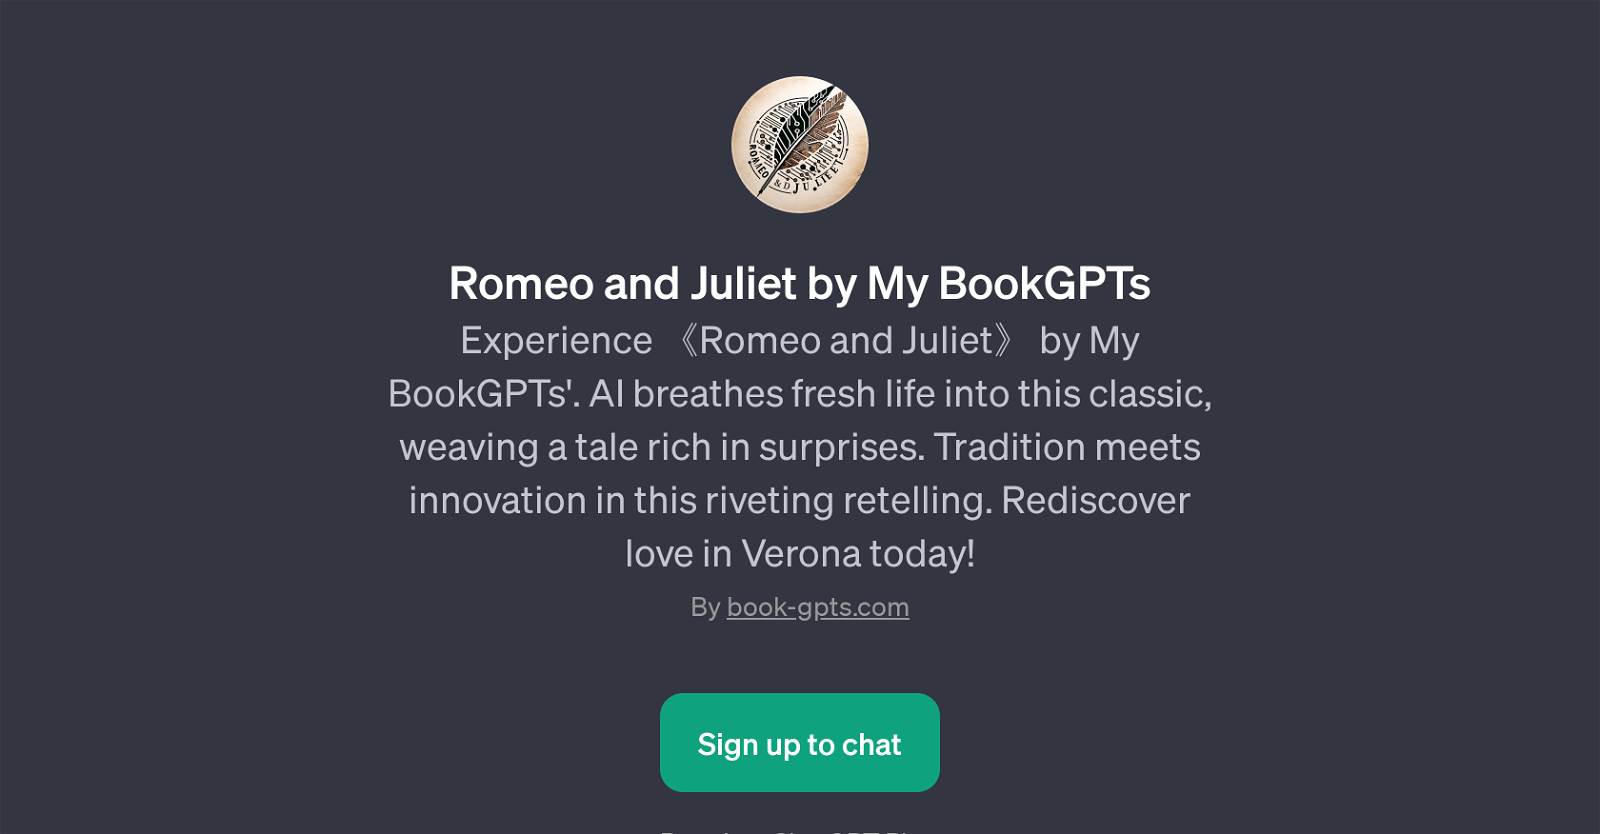 Romeo and Juliet by My BookGPTs website